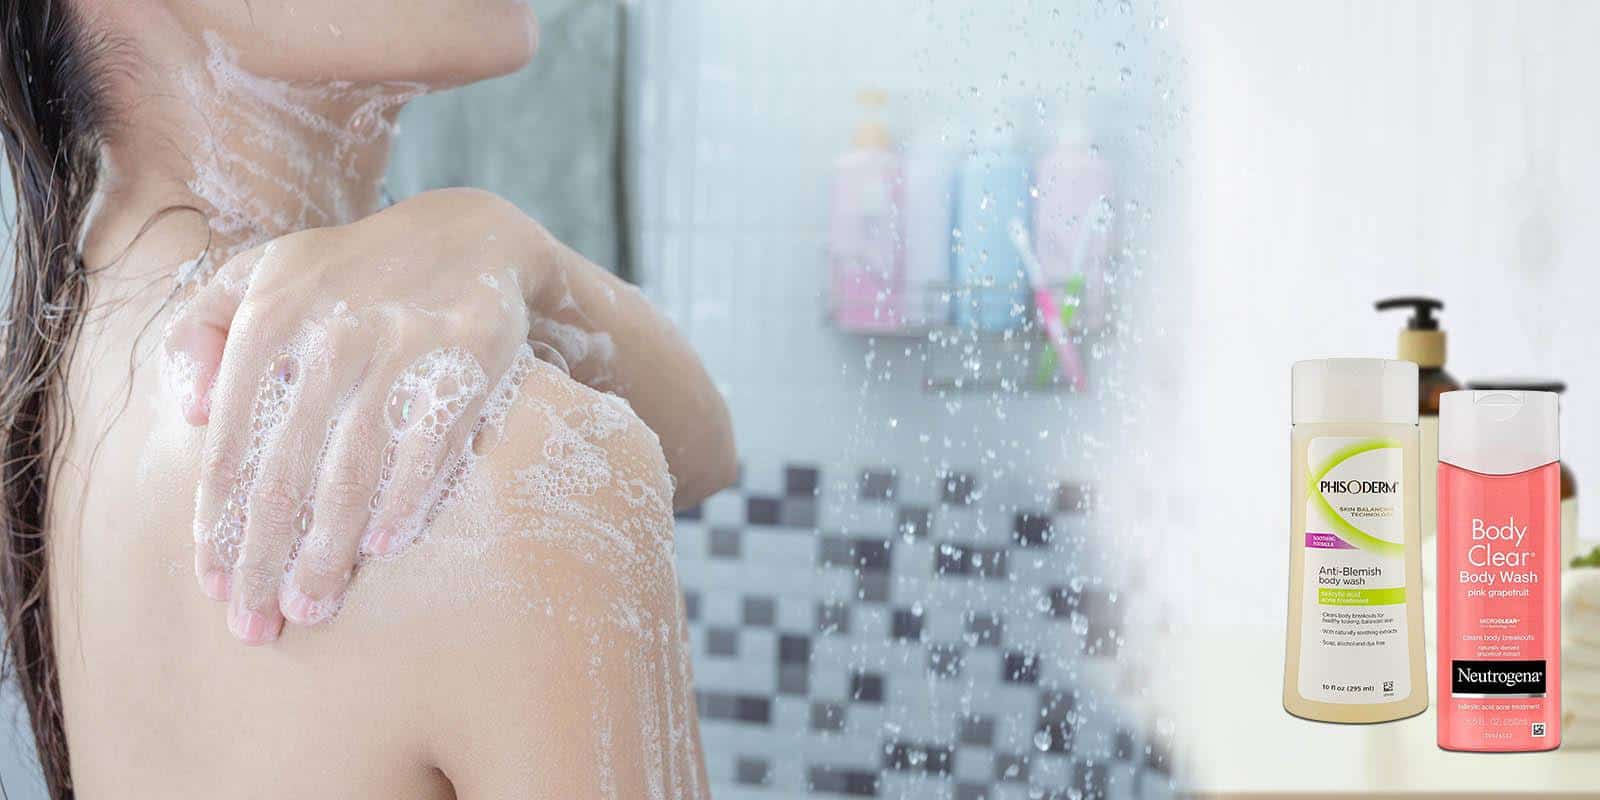 Best Body Washes & Soaps for Sensitive Skin